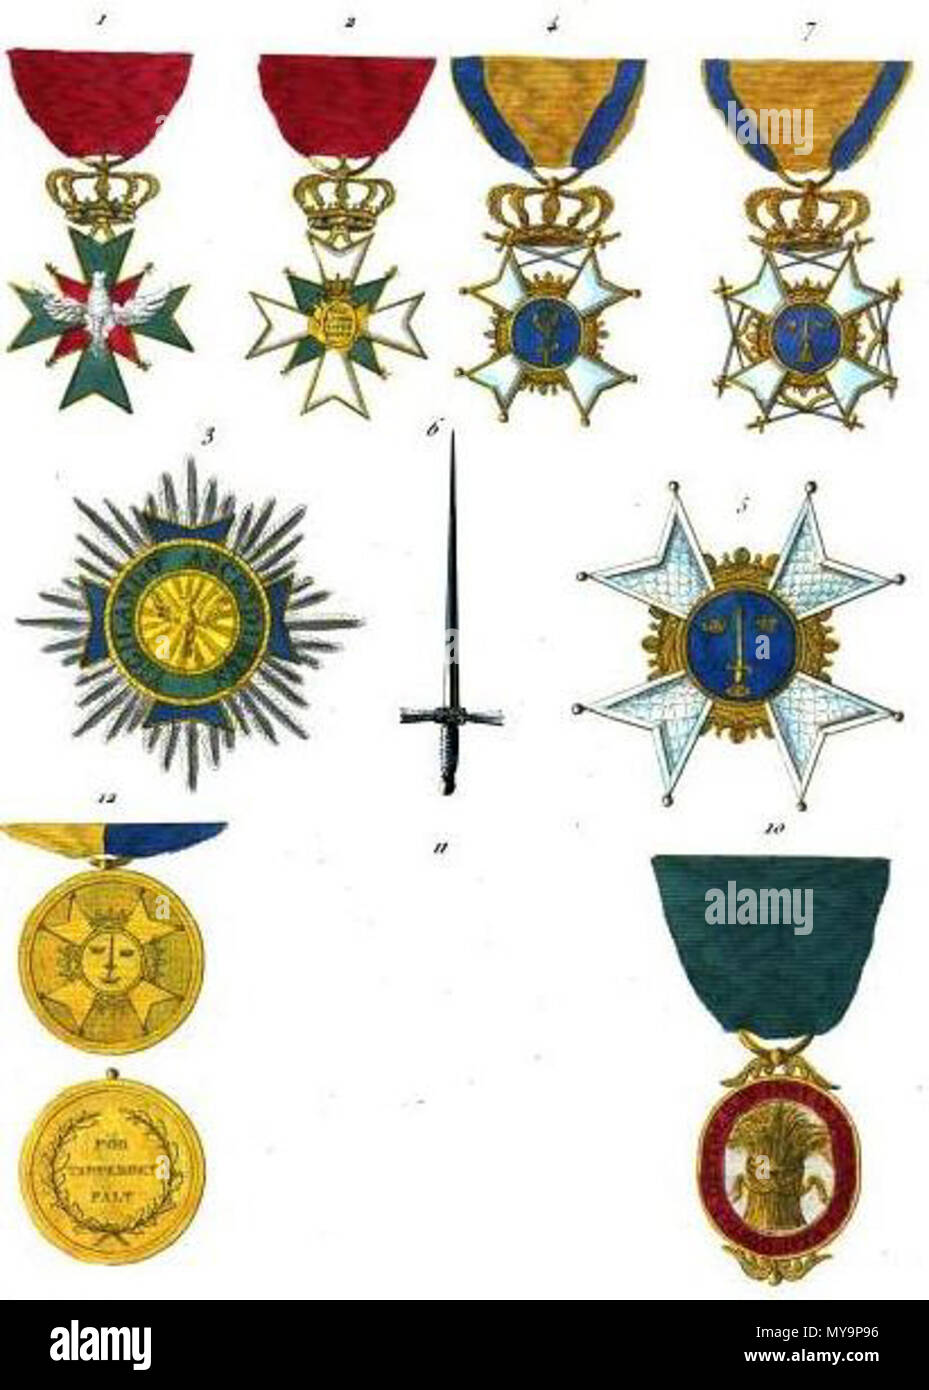 .  Français : Collection historique des ordres de chevalerie civils et militaires... English: Orders of chivalry 1. Order of the White Falcon (Saxony), badge obverse 2. Order of the White Falcon (Saxony), badge reverse 3. Order of the White Falcon (Saxony), star 4. Order of the Sword (Sweden), badge of Knights Cross 5. Order of the Sword (Sweden), star 6. Order of the Sword (Sweden), sword 7. Order of the Sword (Sweden), badge of Grand Cross 10. Order of Vasa (Sweden), badge 11. ----- 12. Medal for Valour in the Field (Sweden), obverse & reverse . 1820 49 Aristide Michel Perrot - Collection hi Stock Photo